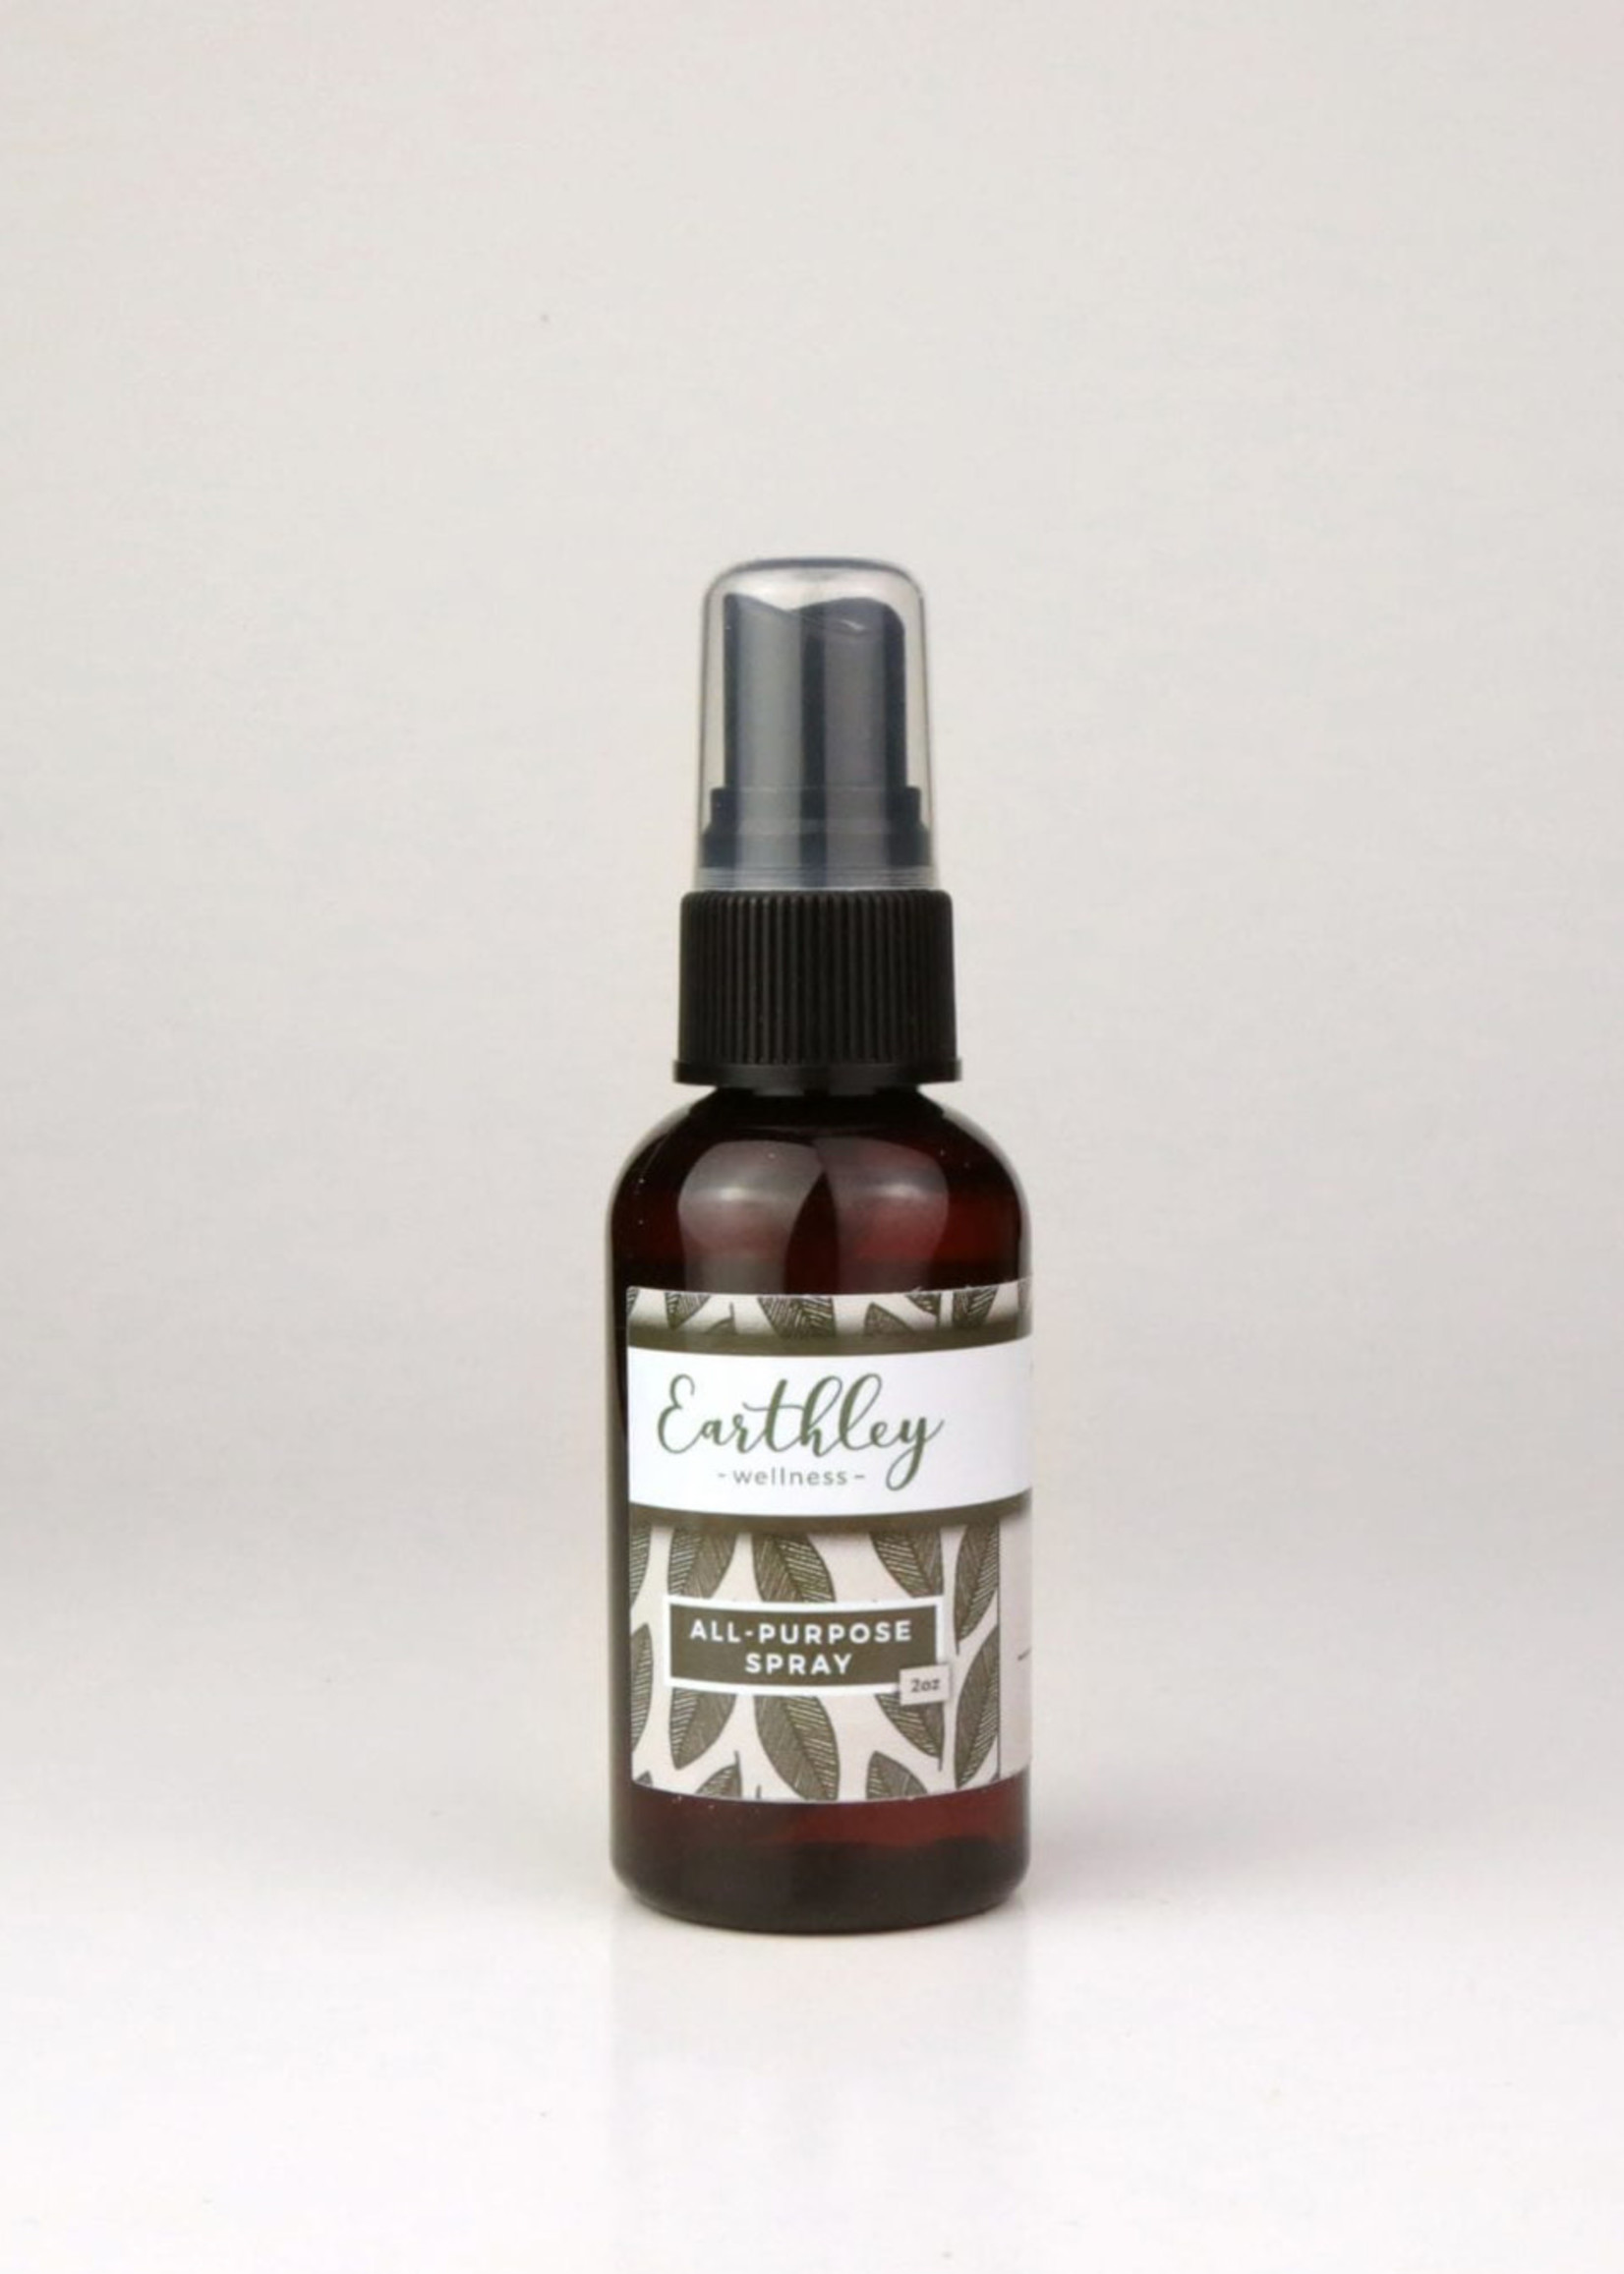 Earthley Wellness All Purpose Spay (Natural Hand Sanitizer)